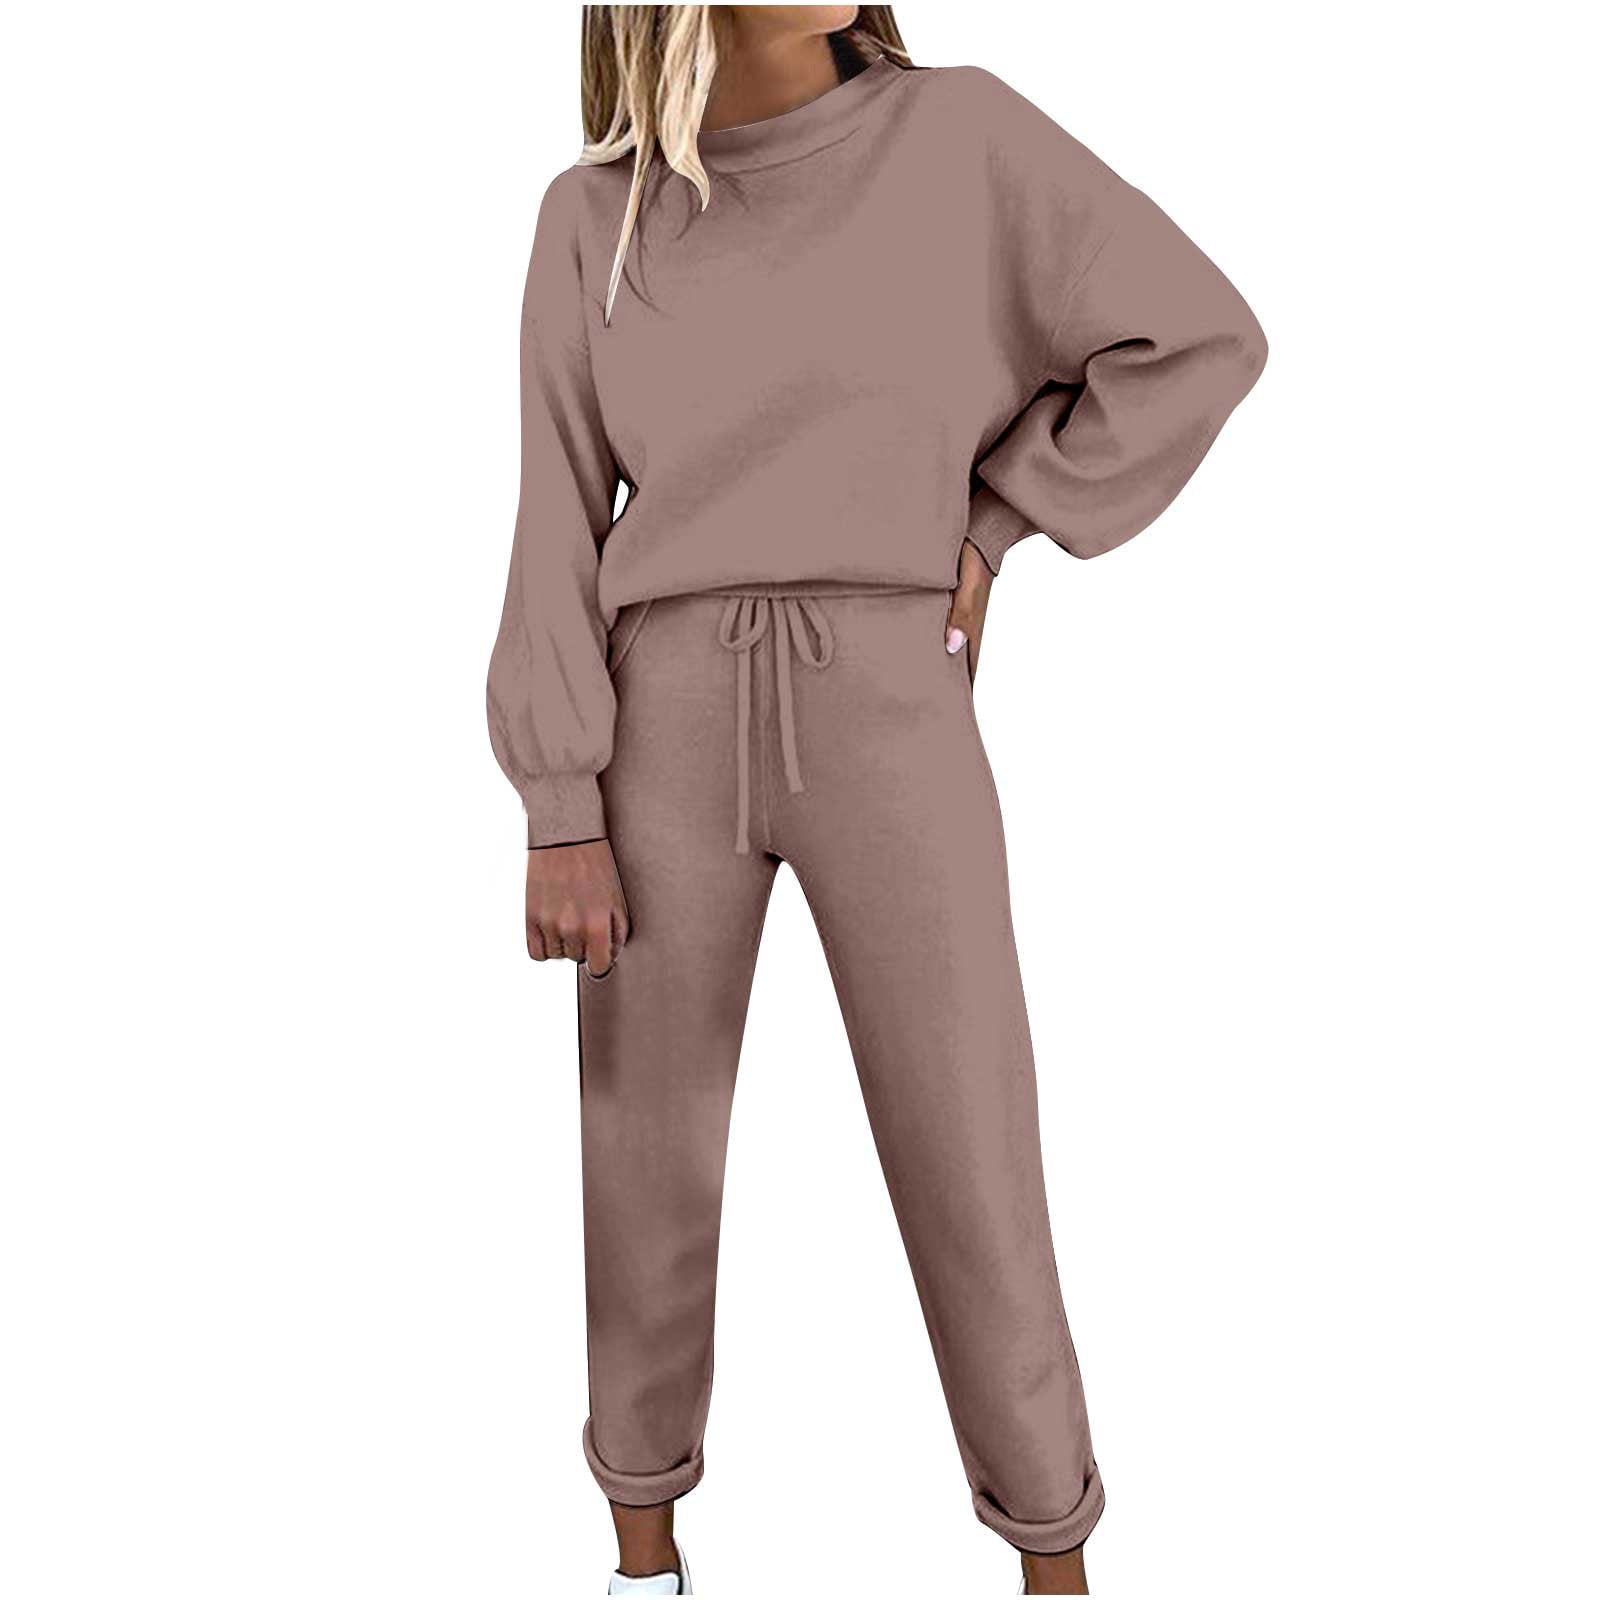 AOOCHASLIY Sweat Suits for Women Clearance Jogging Suits Pullover ...